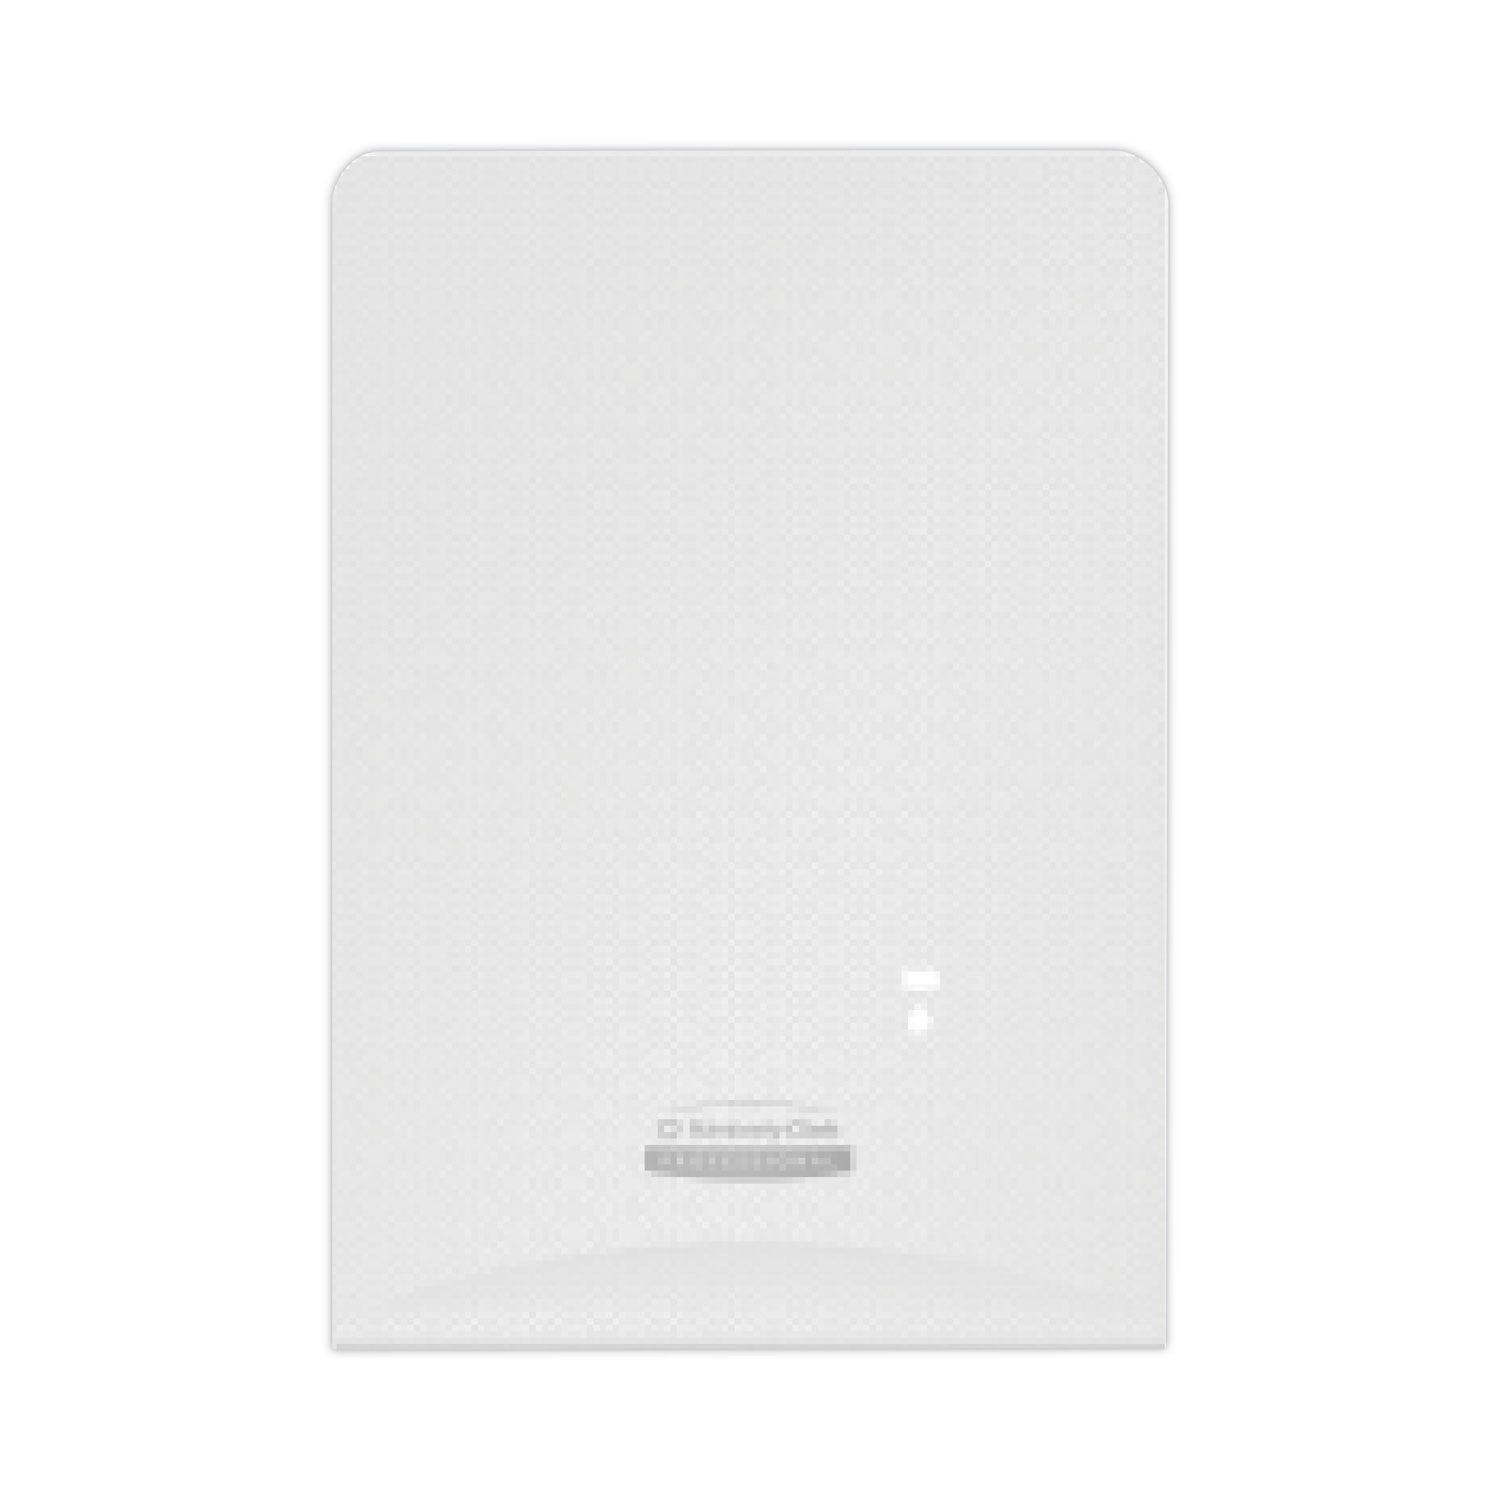 Kimberly-Clark Professional* ICON Faceplate for Automatic Soap and Sanitizer Dispenser, 8.25 x 22 x 12.12, White Mosaic